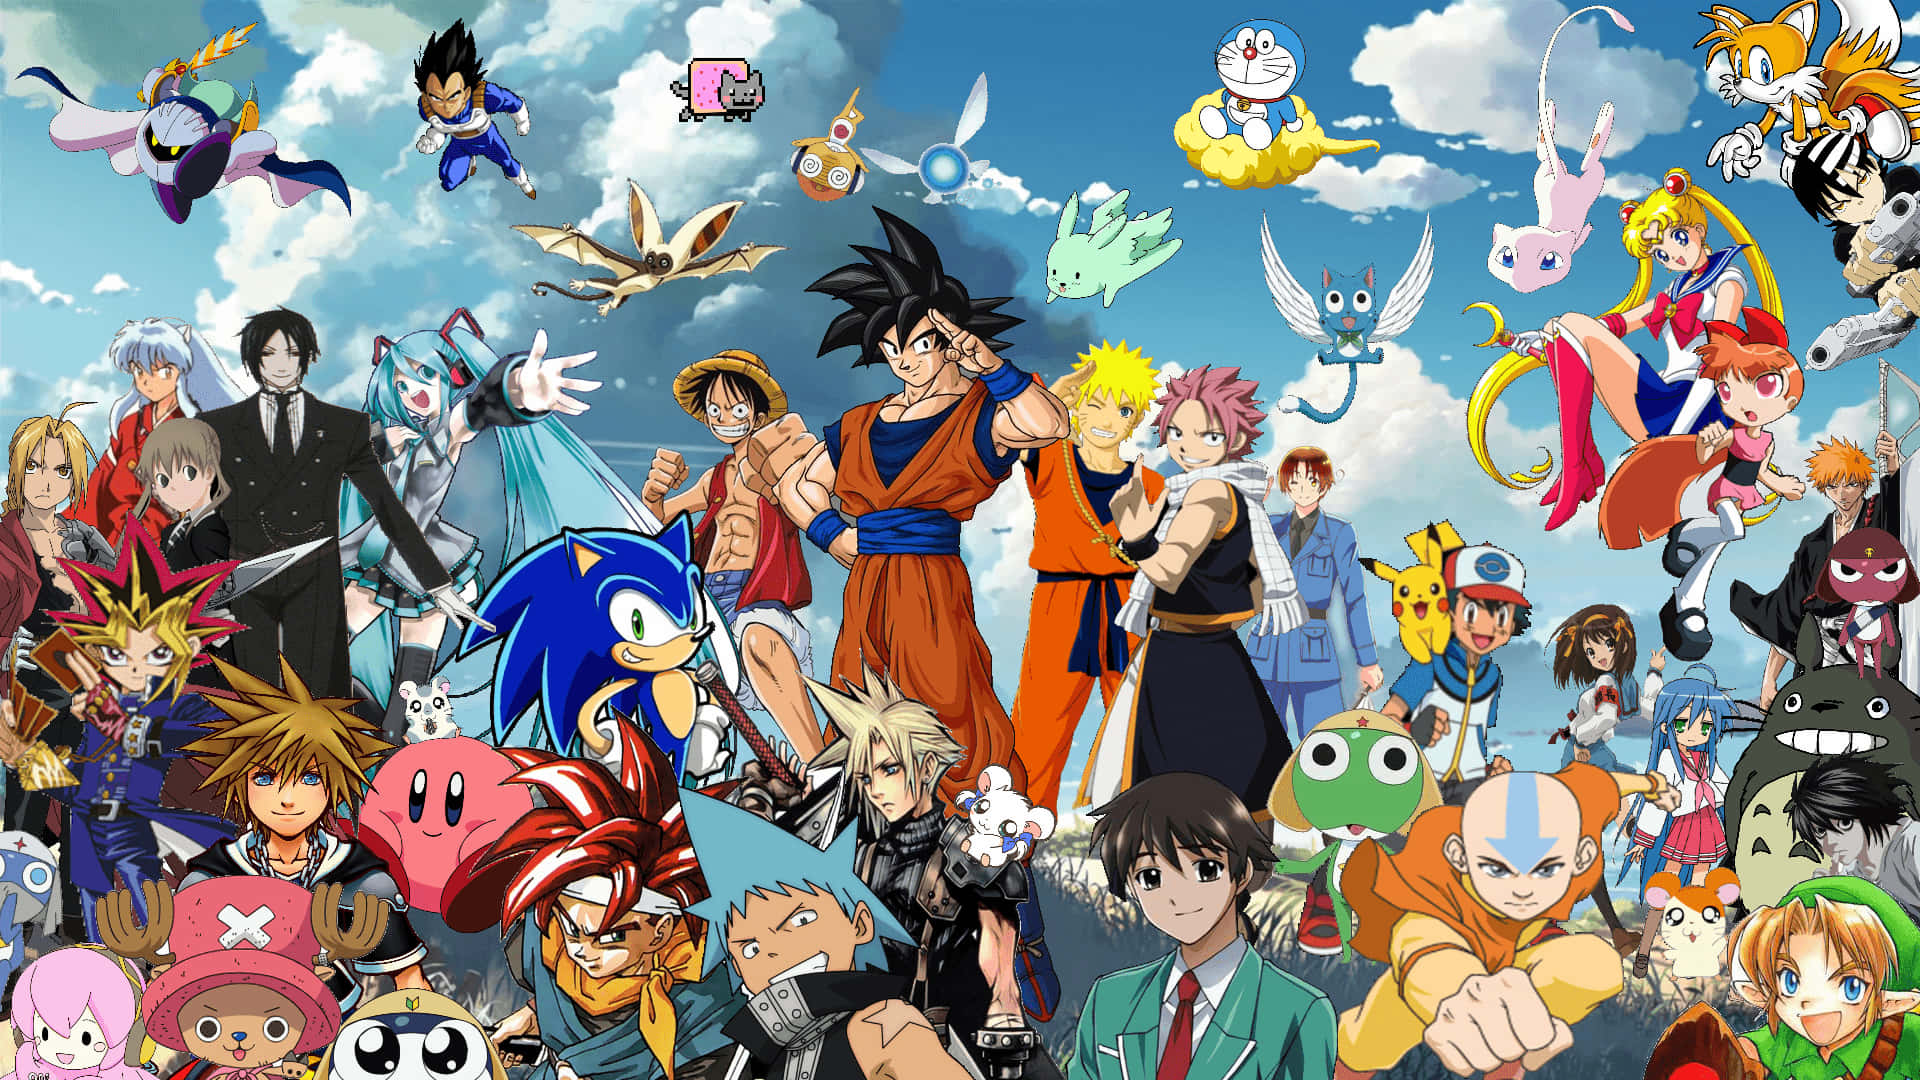 A Group Of Anime Characters Posing In Front Of A Cloud Wallpaper